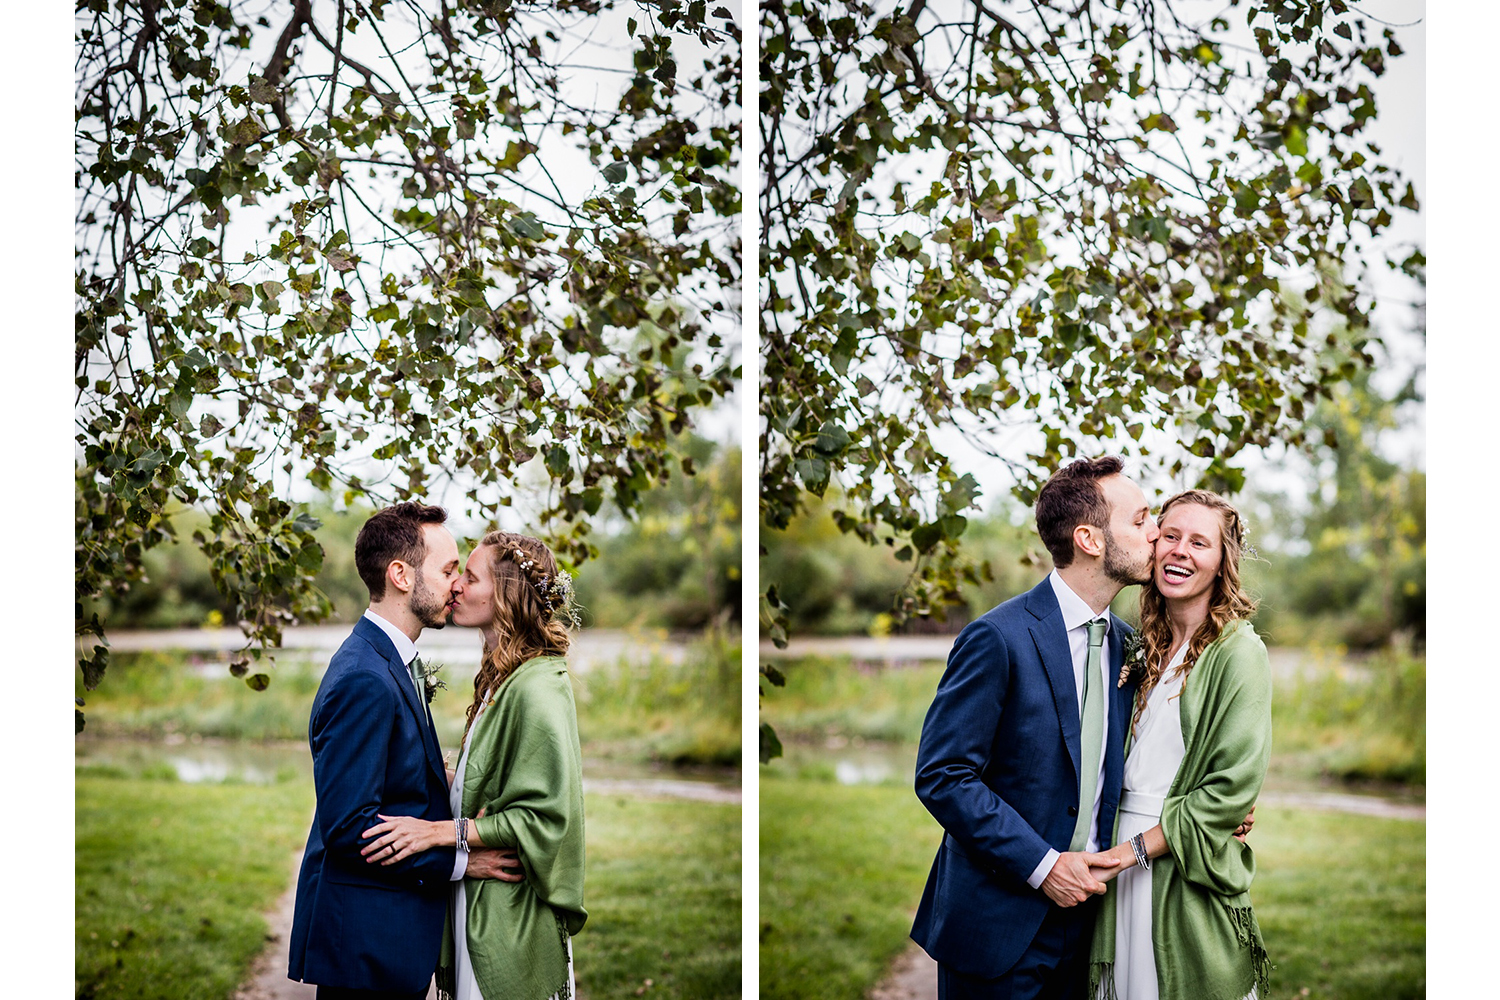 A couple laughs and kisses each other during an Illinois Beach Resort wedding.